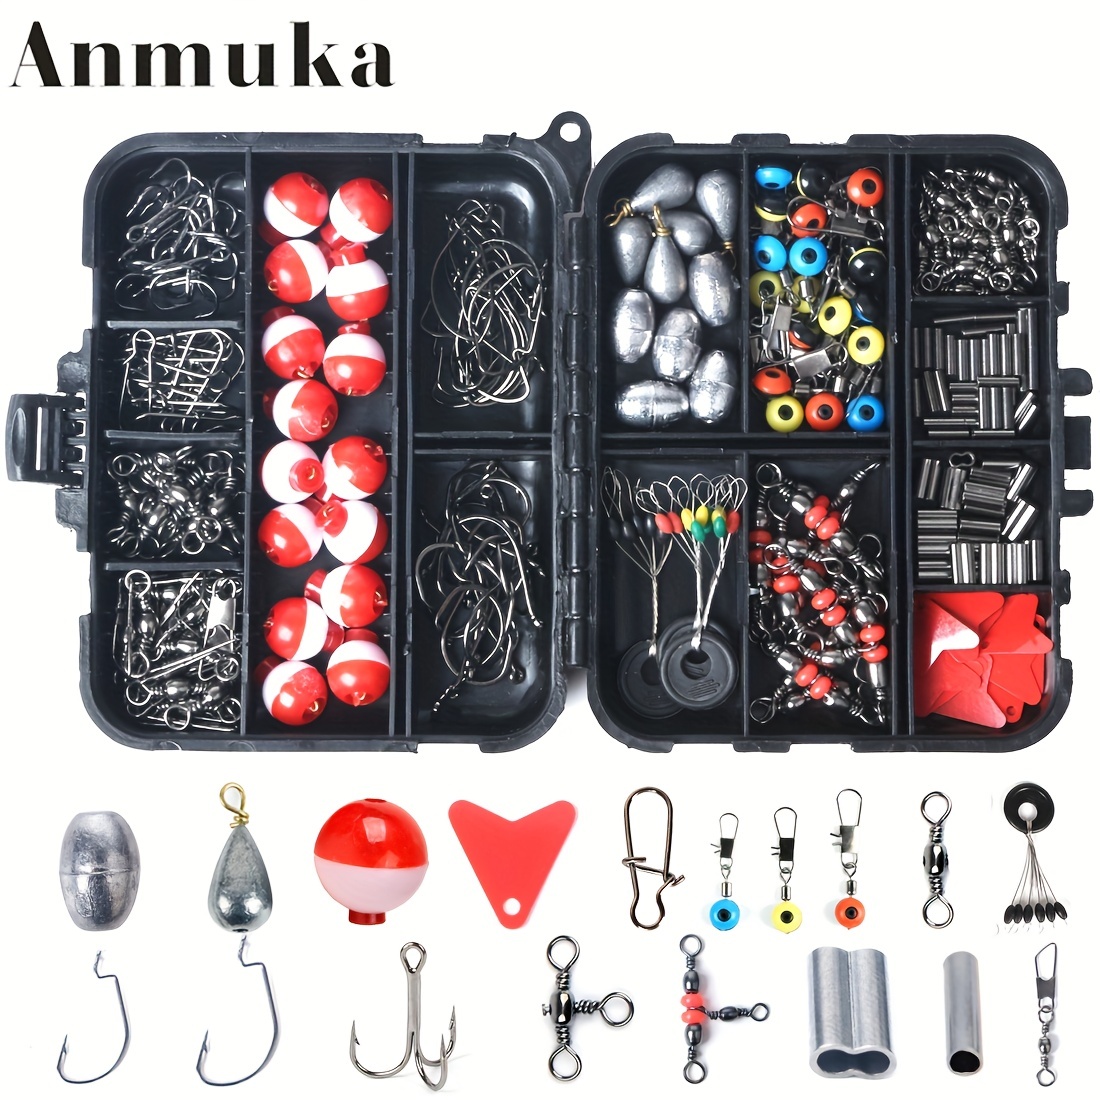  KINJOEK Fishing Tackle Box Kit, Portable 4 Layers Fishing  Accessory Box Case, Fishing Tackle Storage for Fresh Water and Salt Water :  Sports & Outdoors